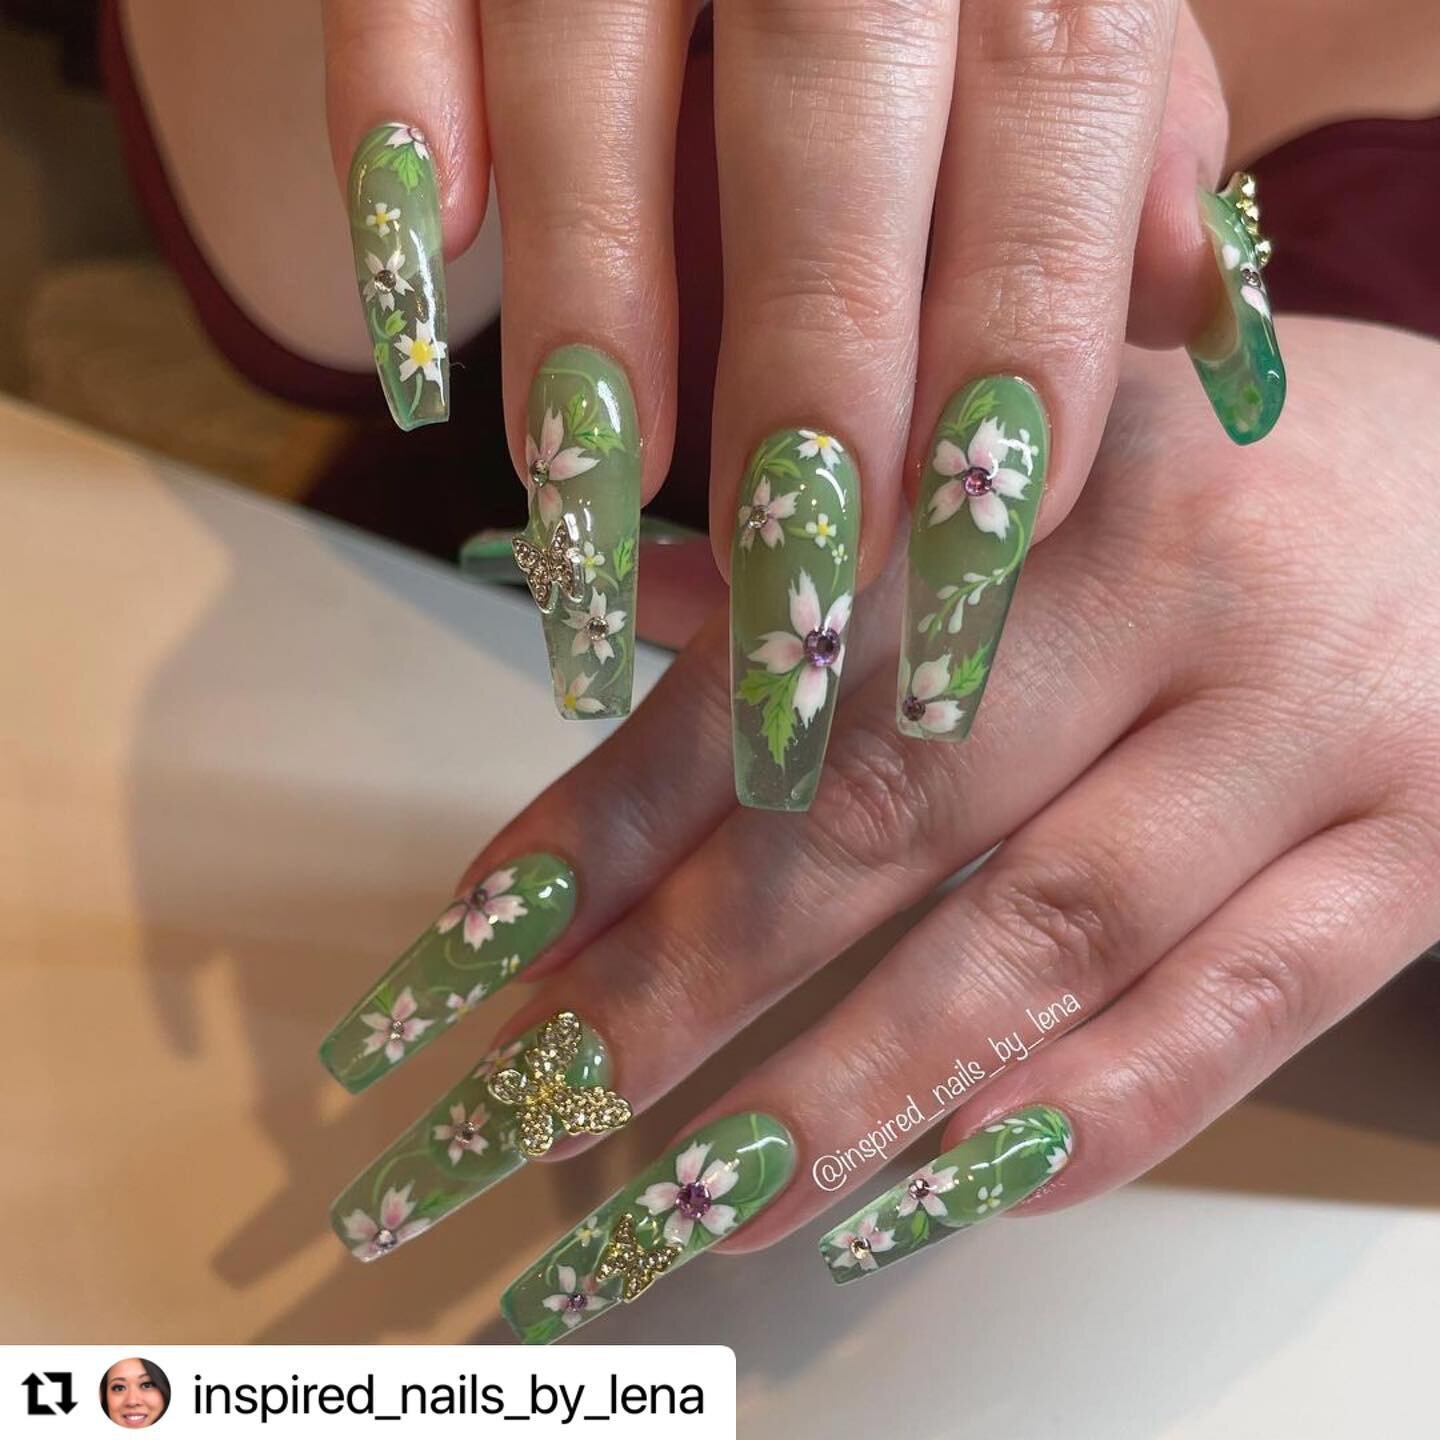 #Repost @inspired_nails_by_lena with @use.repost
・・・
This is me trying to channel spring. 🌸🌸🦋
.
Acrylics + Level 3 nail art